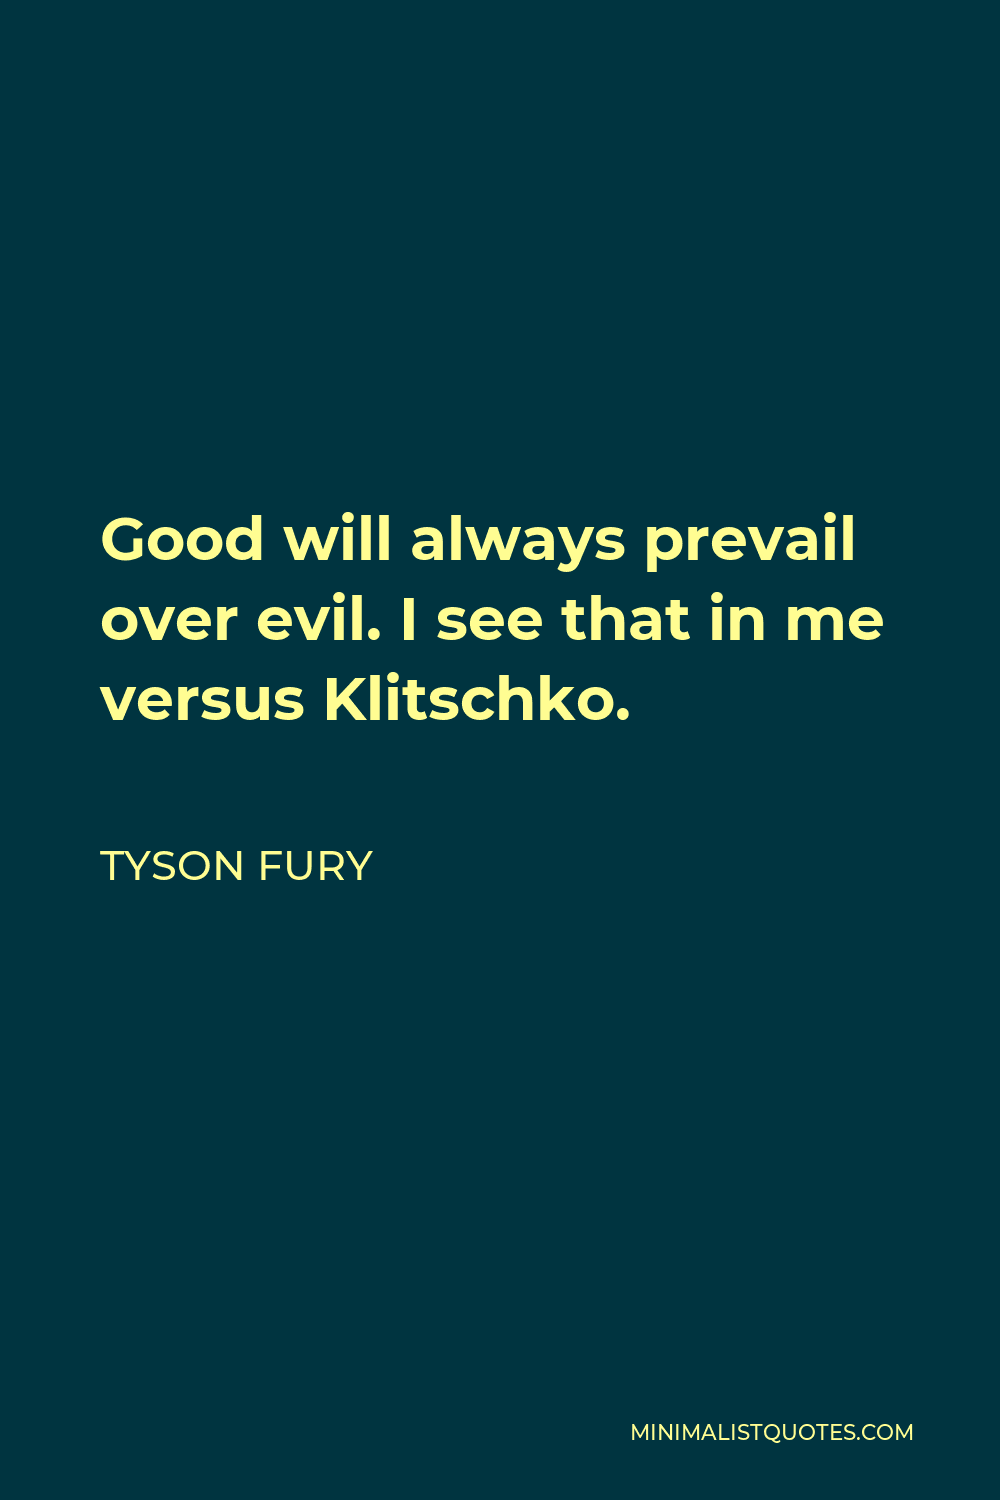 Tyson Fury Quote - Good will always prevail over evil. I see that in me versus Klitschko.